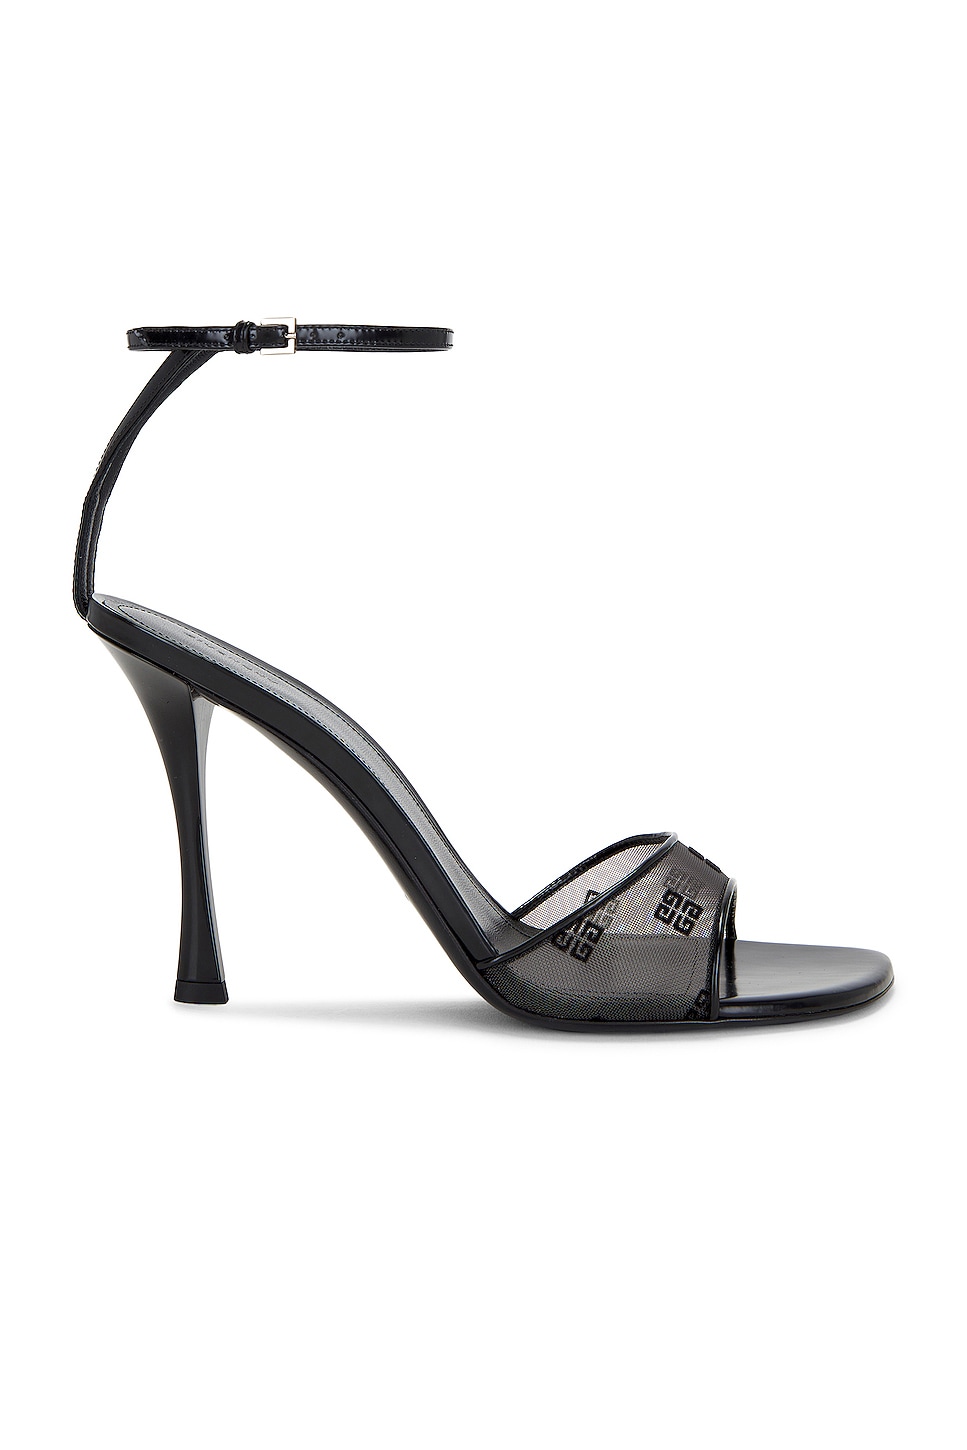 Image 1 of Givenchy Stitch Sandal in Black